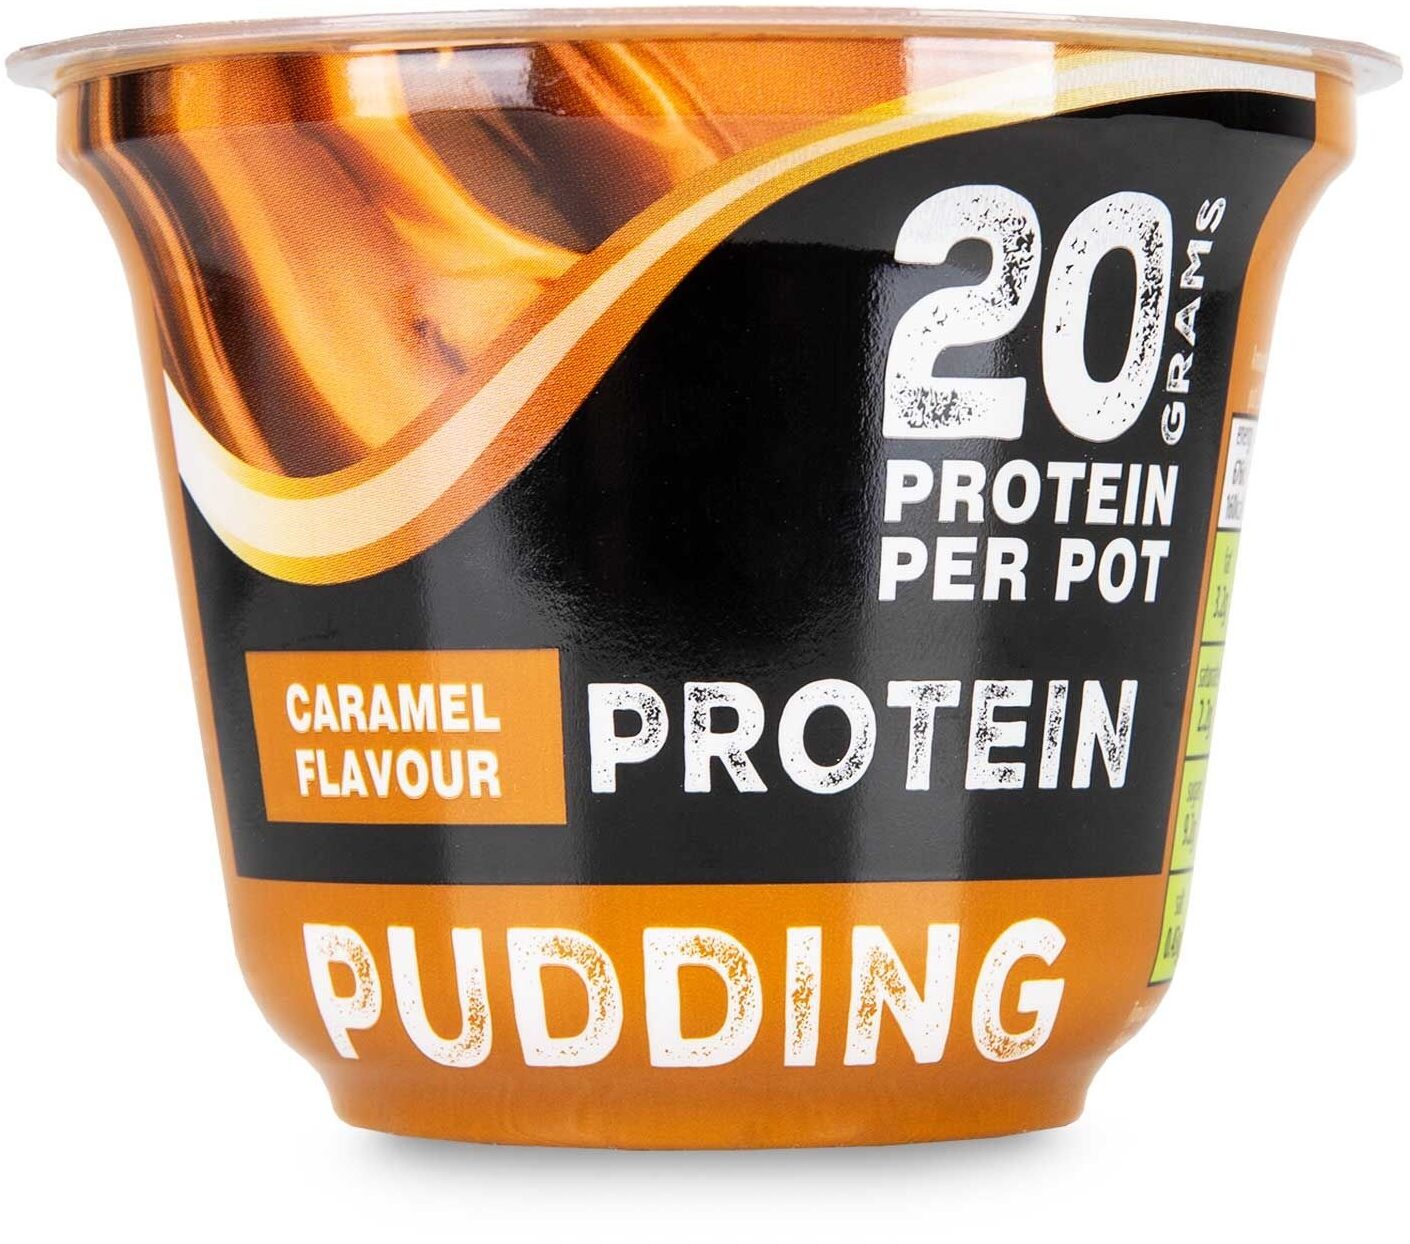 Brooklea Caramel Protein Pudding - Recycling instructions and/or packaging information